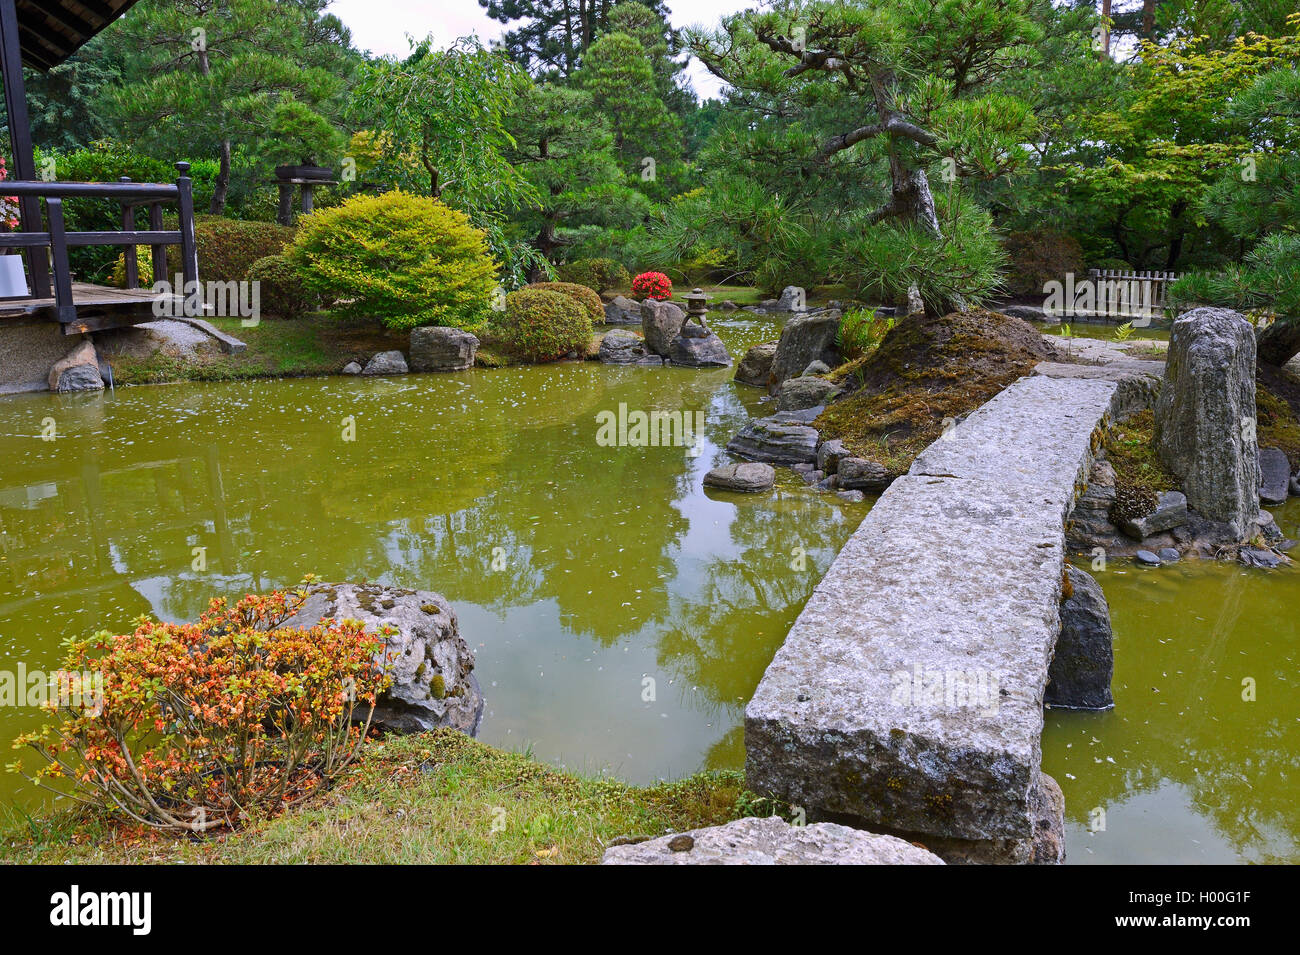 typical Japanese garden with stone decoration and koi pond Stock Photo